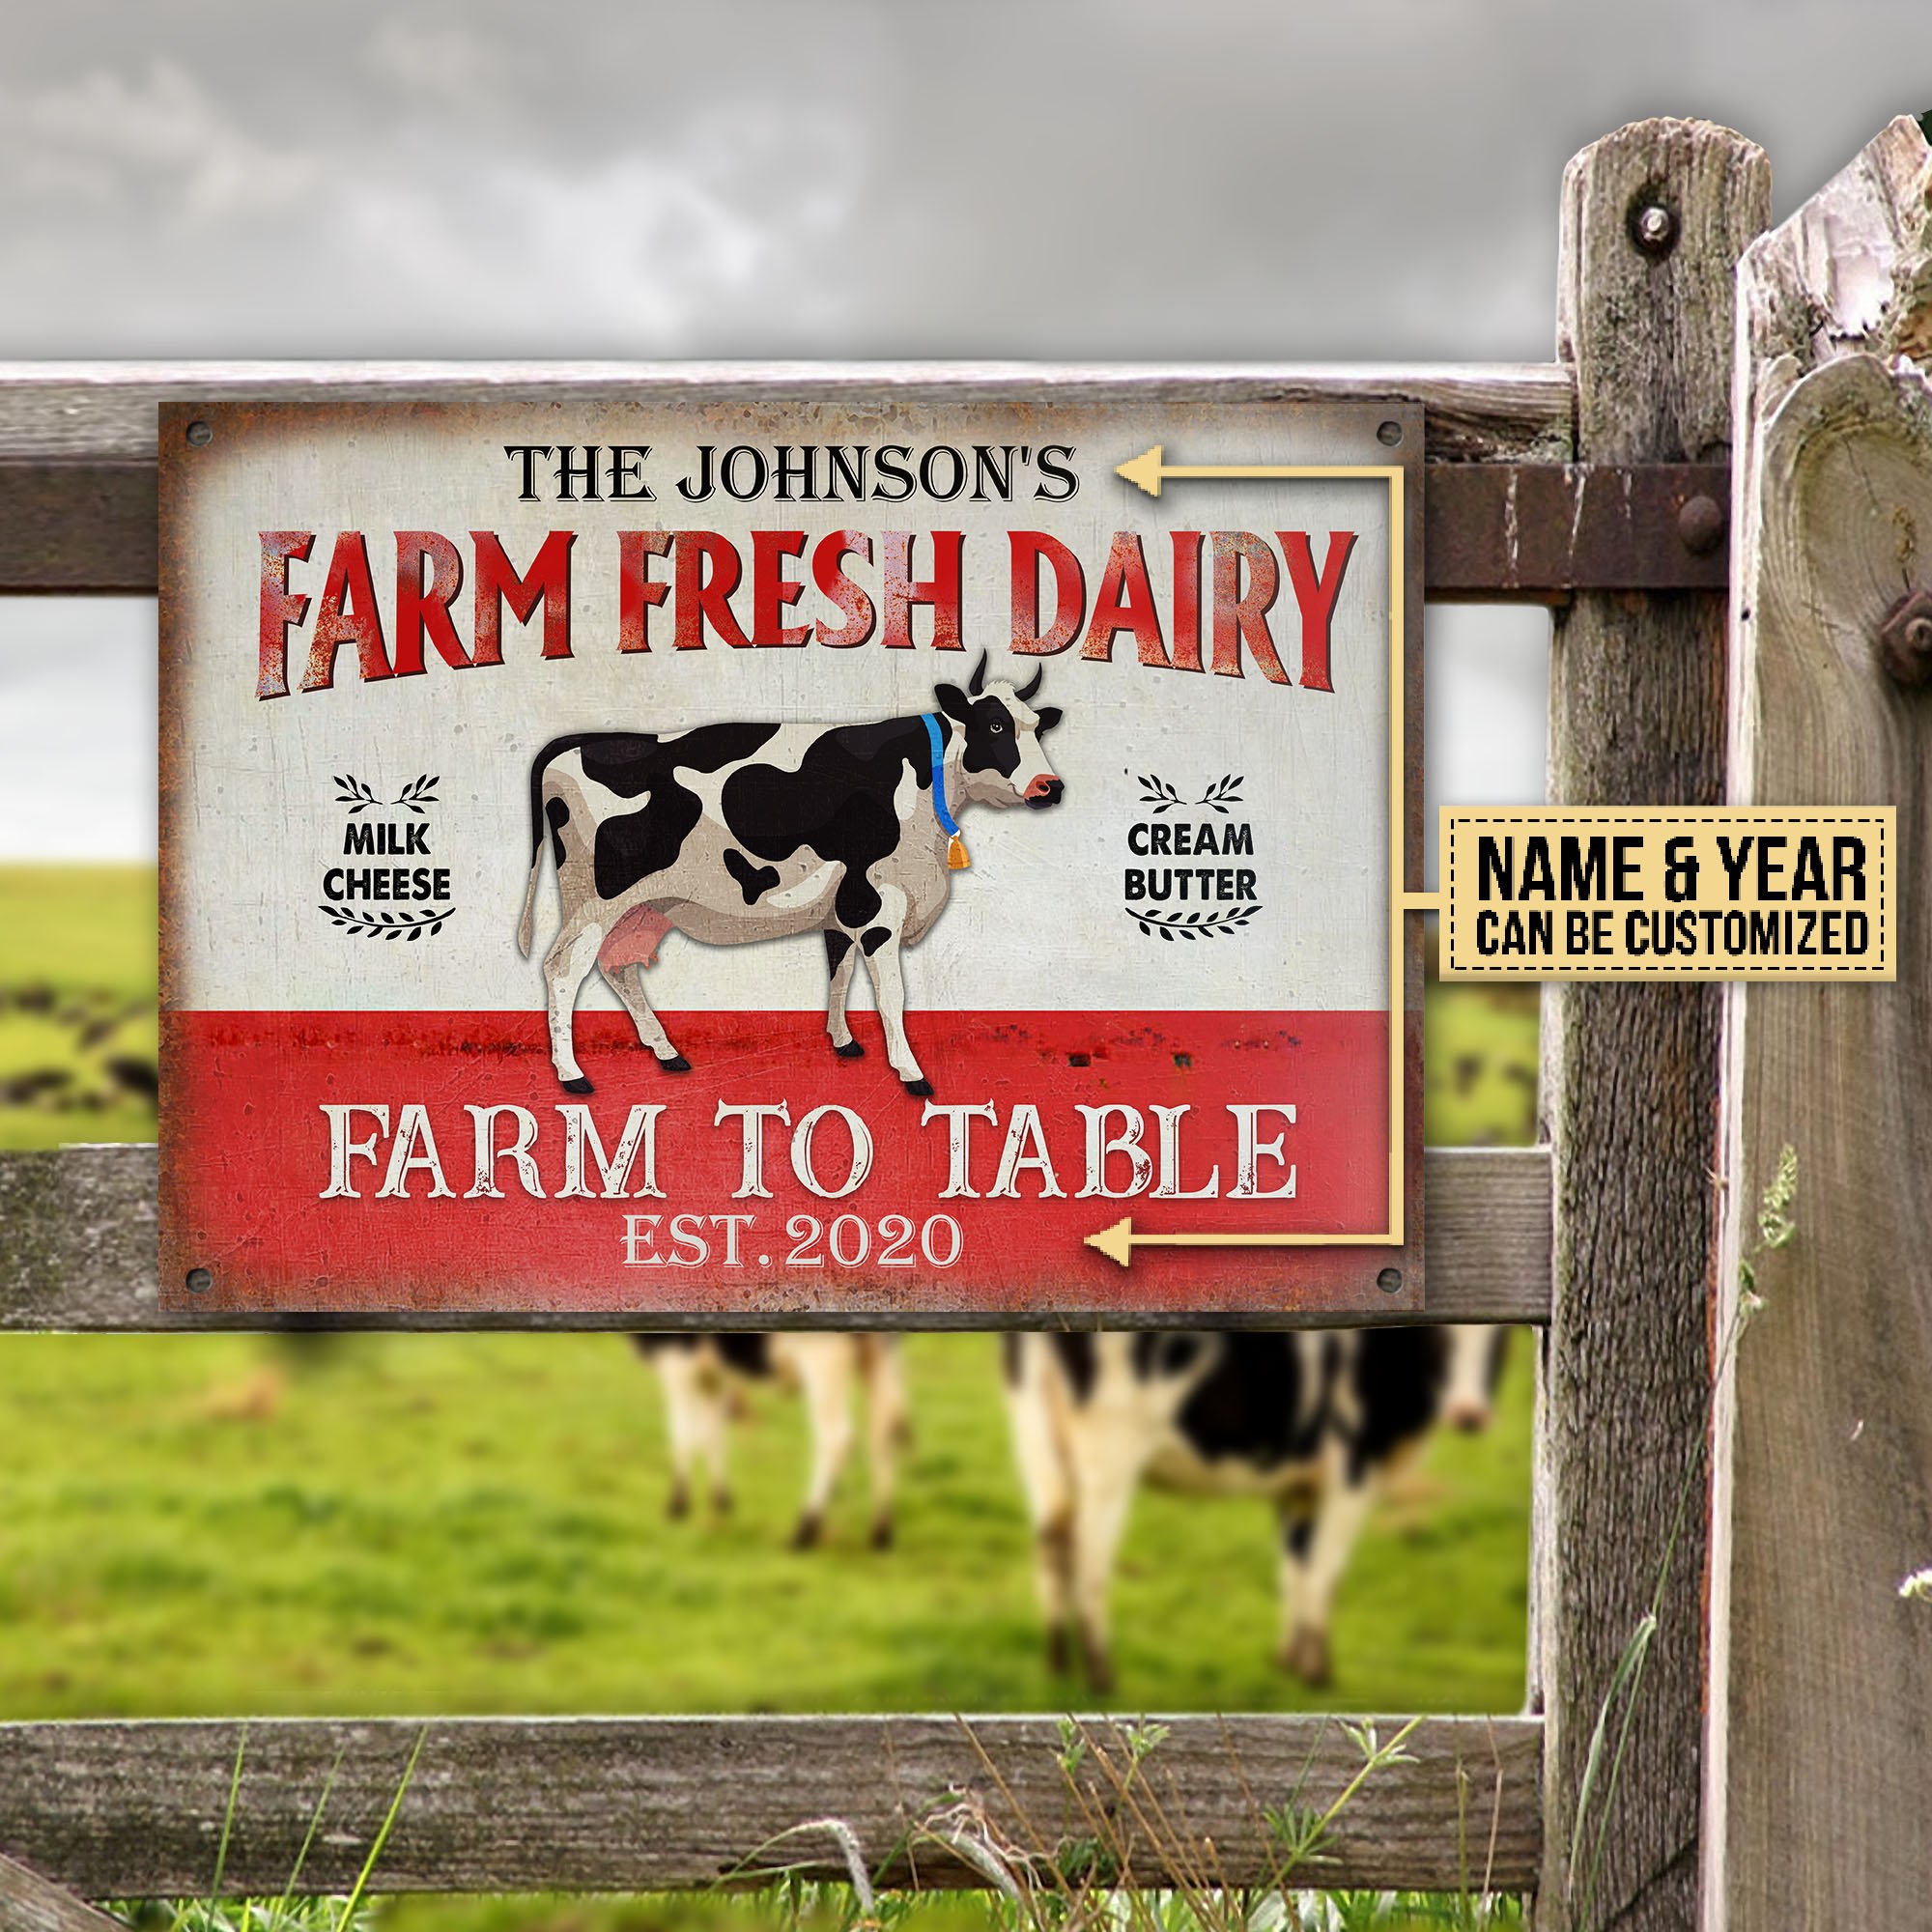 Personalized Farm Fresh Dairy Milk Cheese Customized Classic Metal Signs